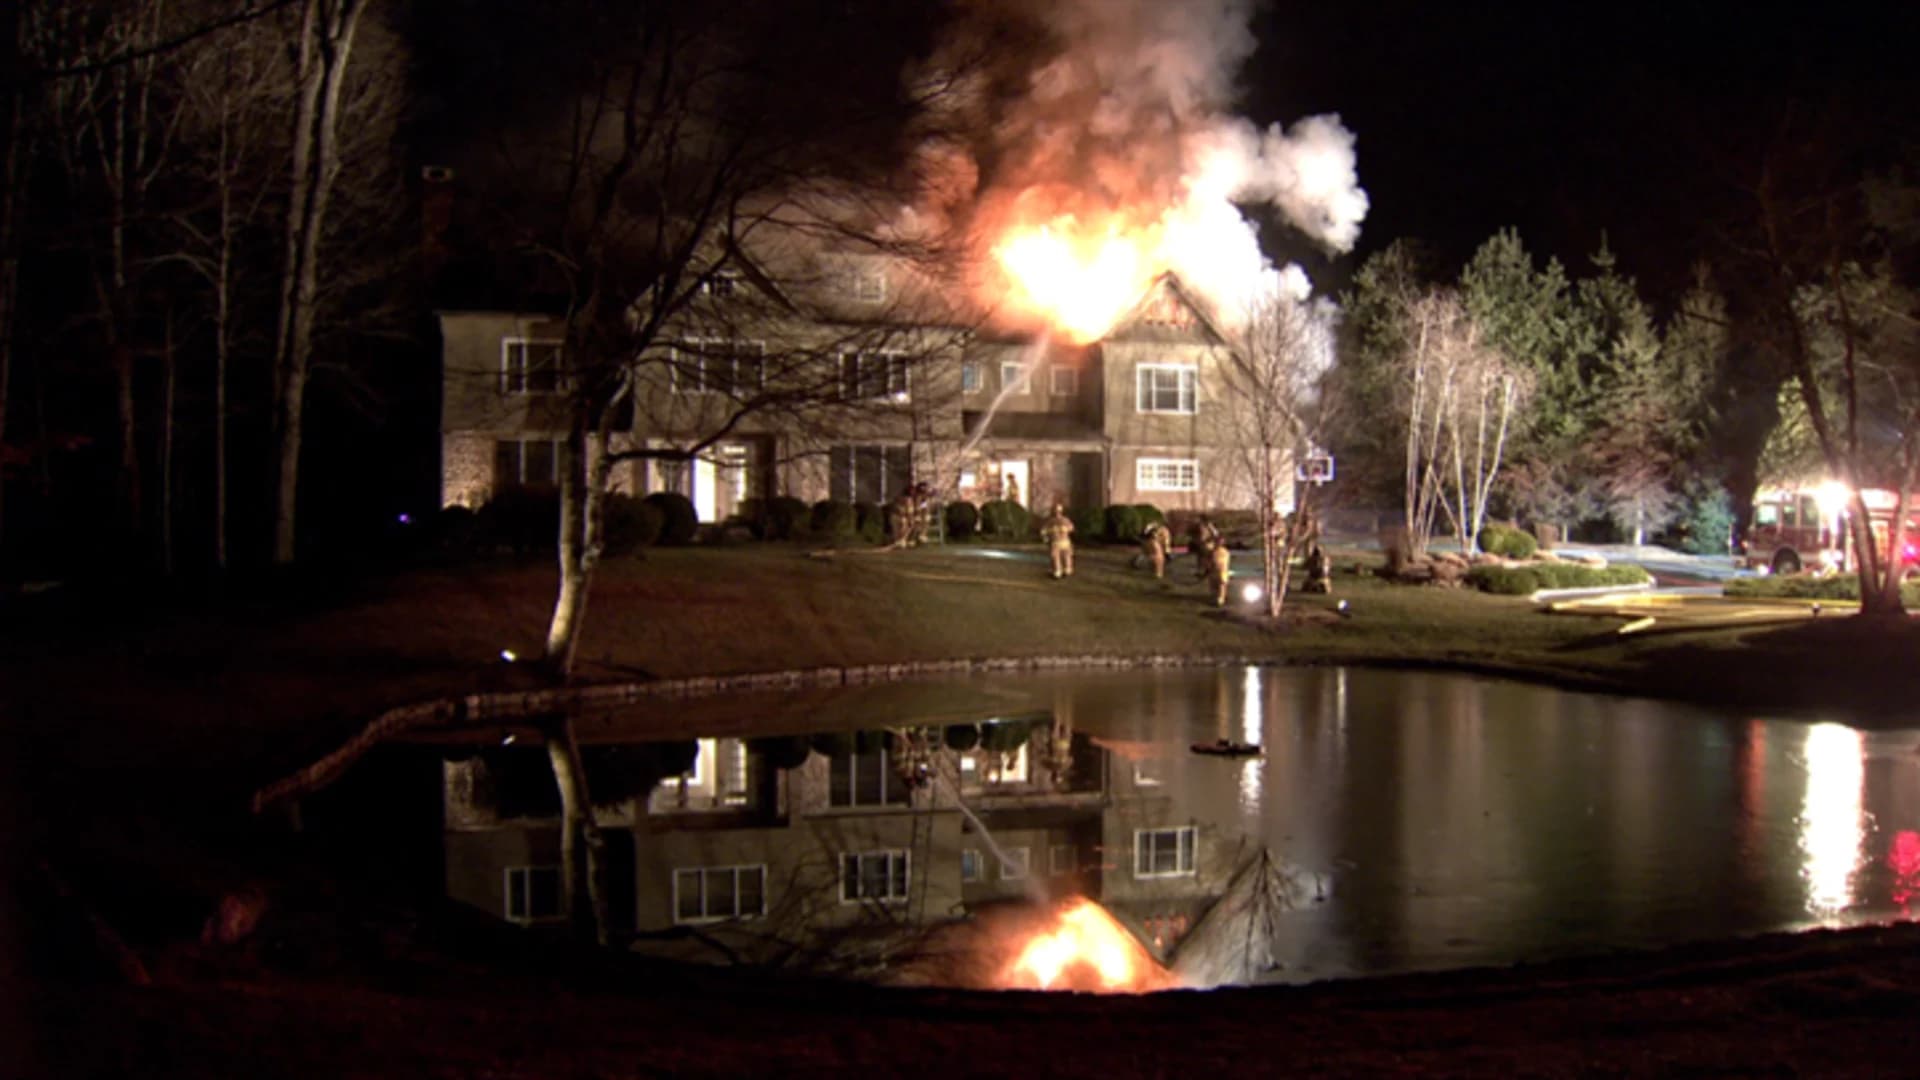 Dad, kids and dog escape fire at $2M Weston home